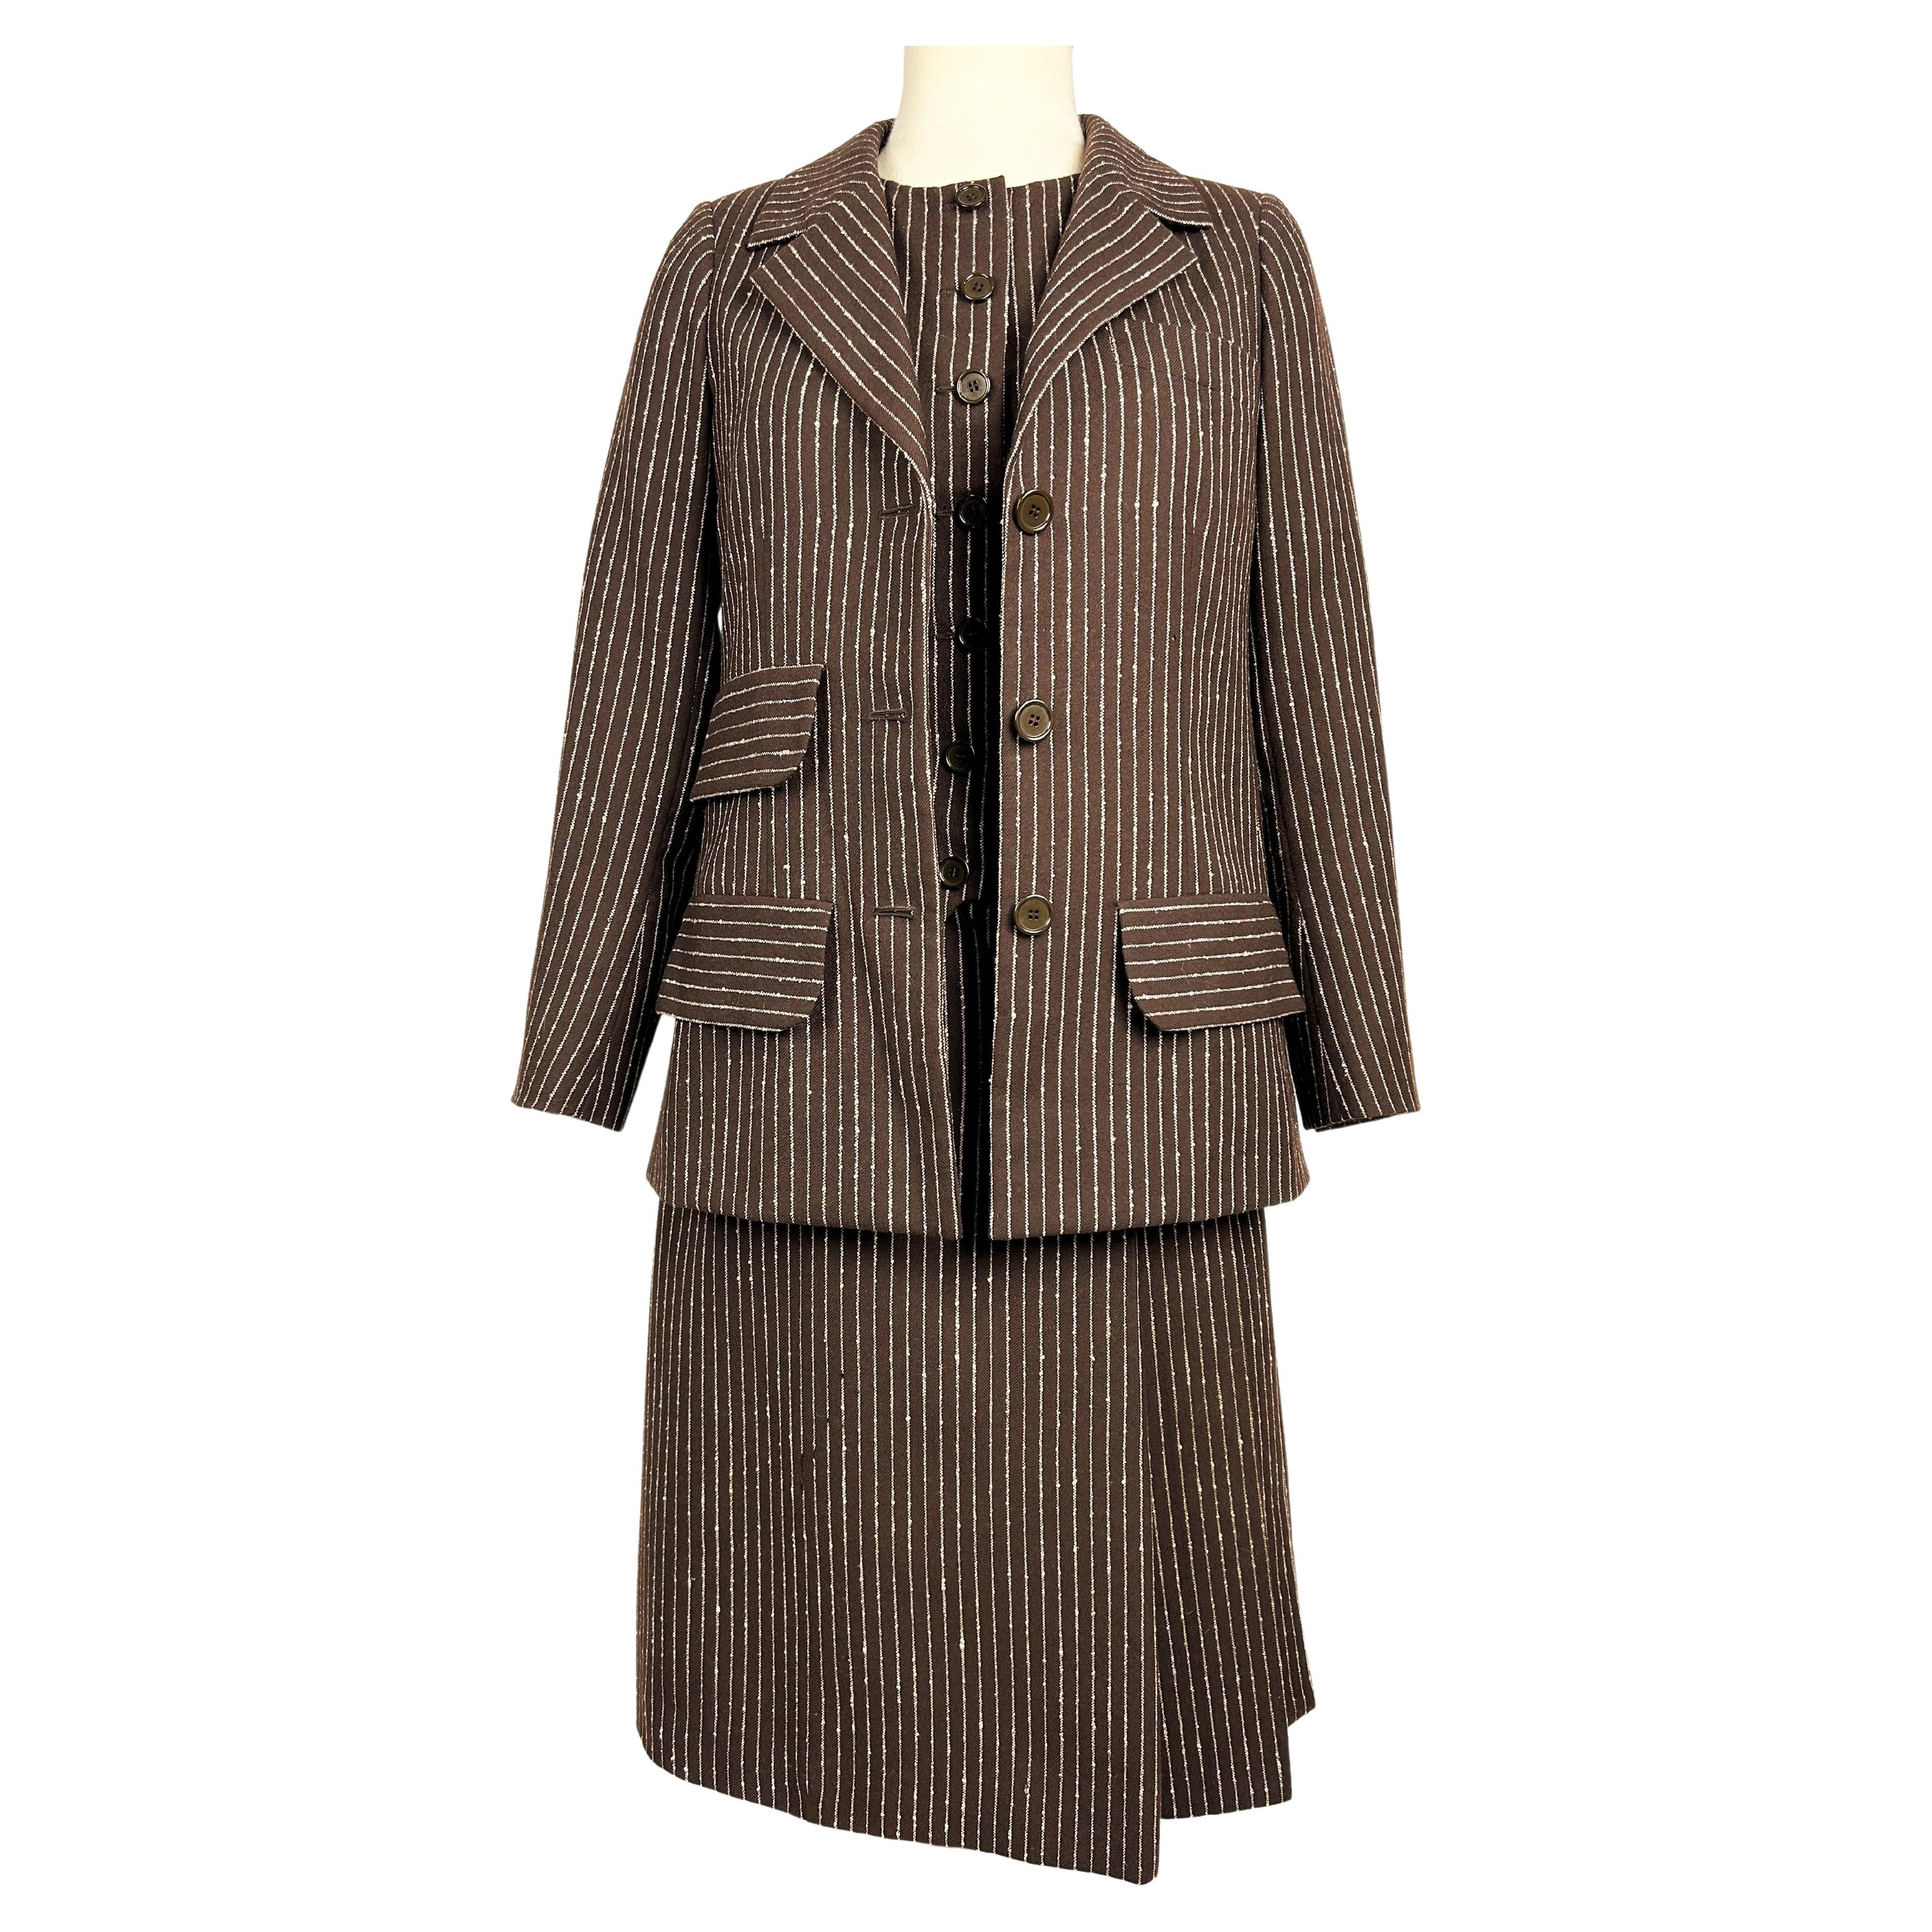 Yves Saint Laurent Haute Couture skirt-suit numbered 14539 Circa 1967/1970 For Sale